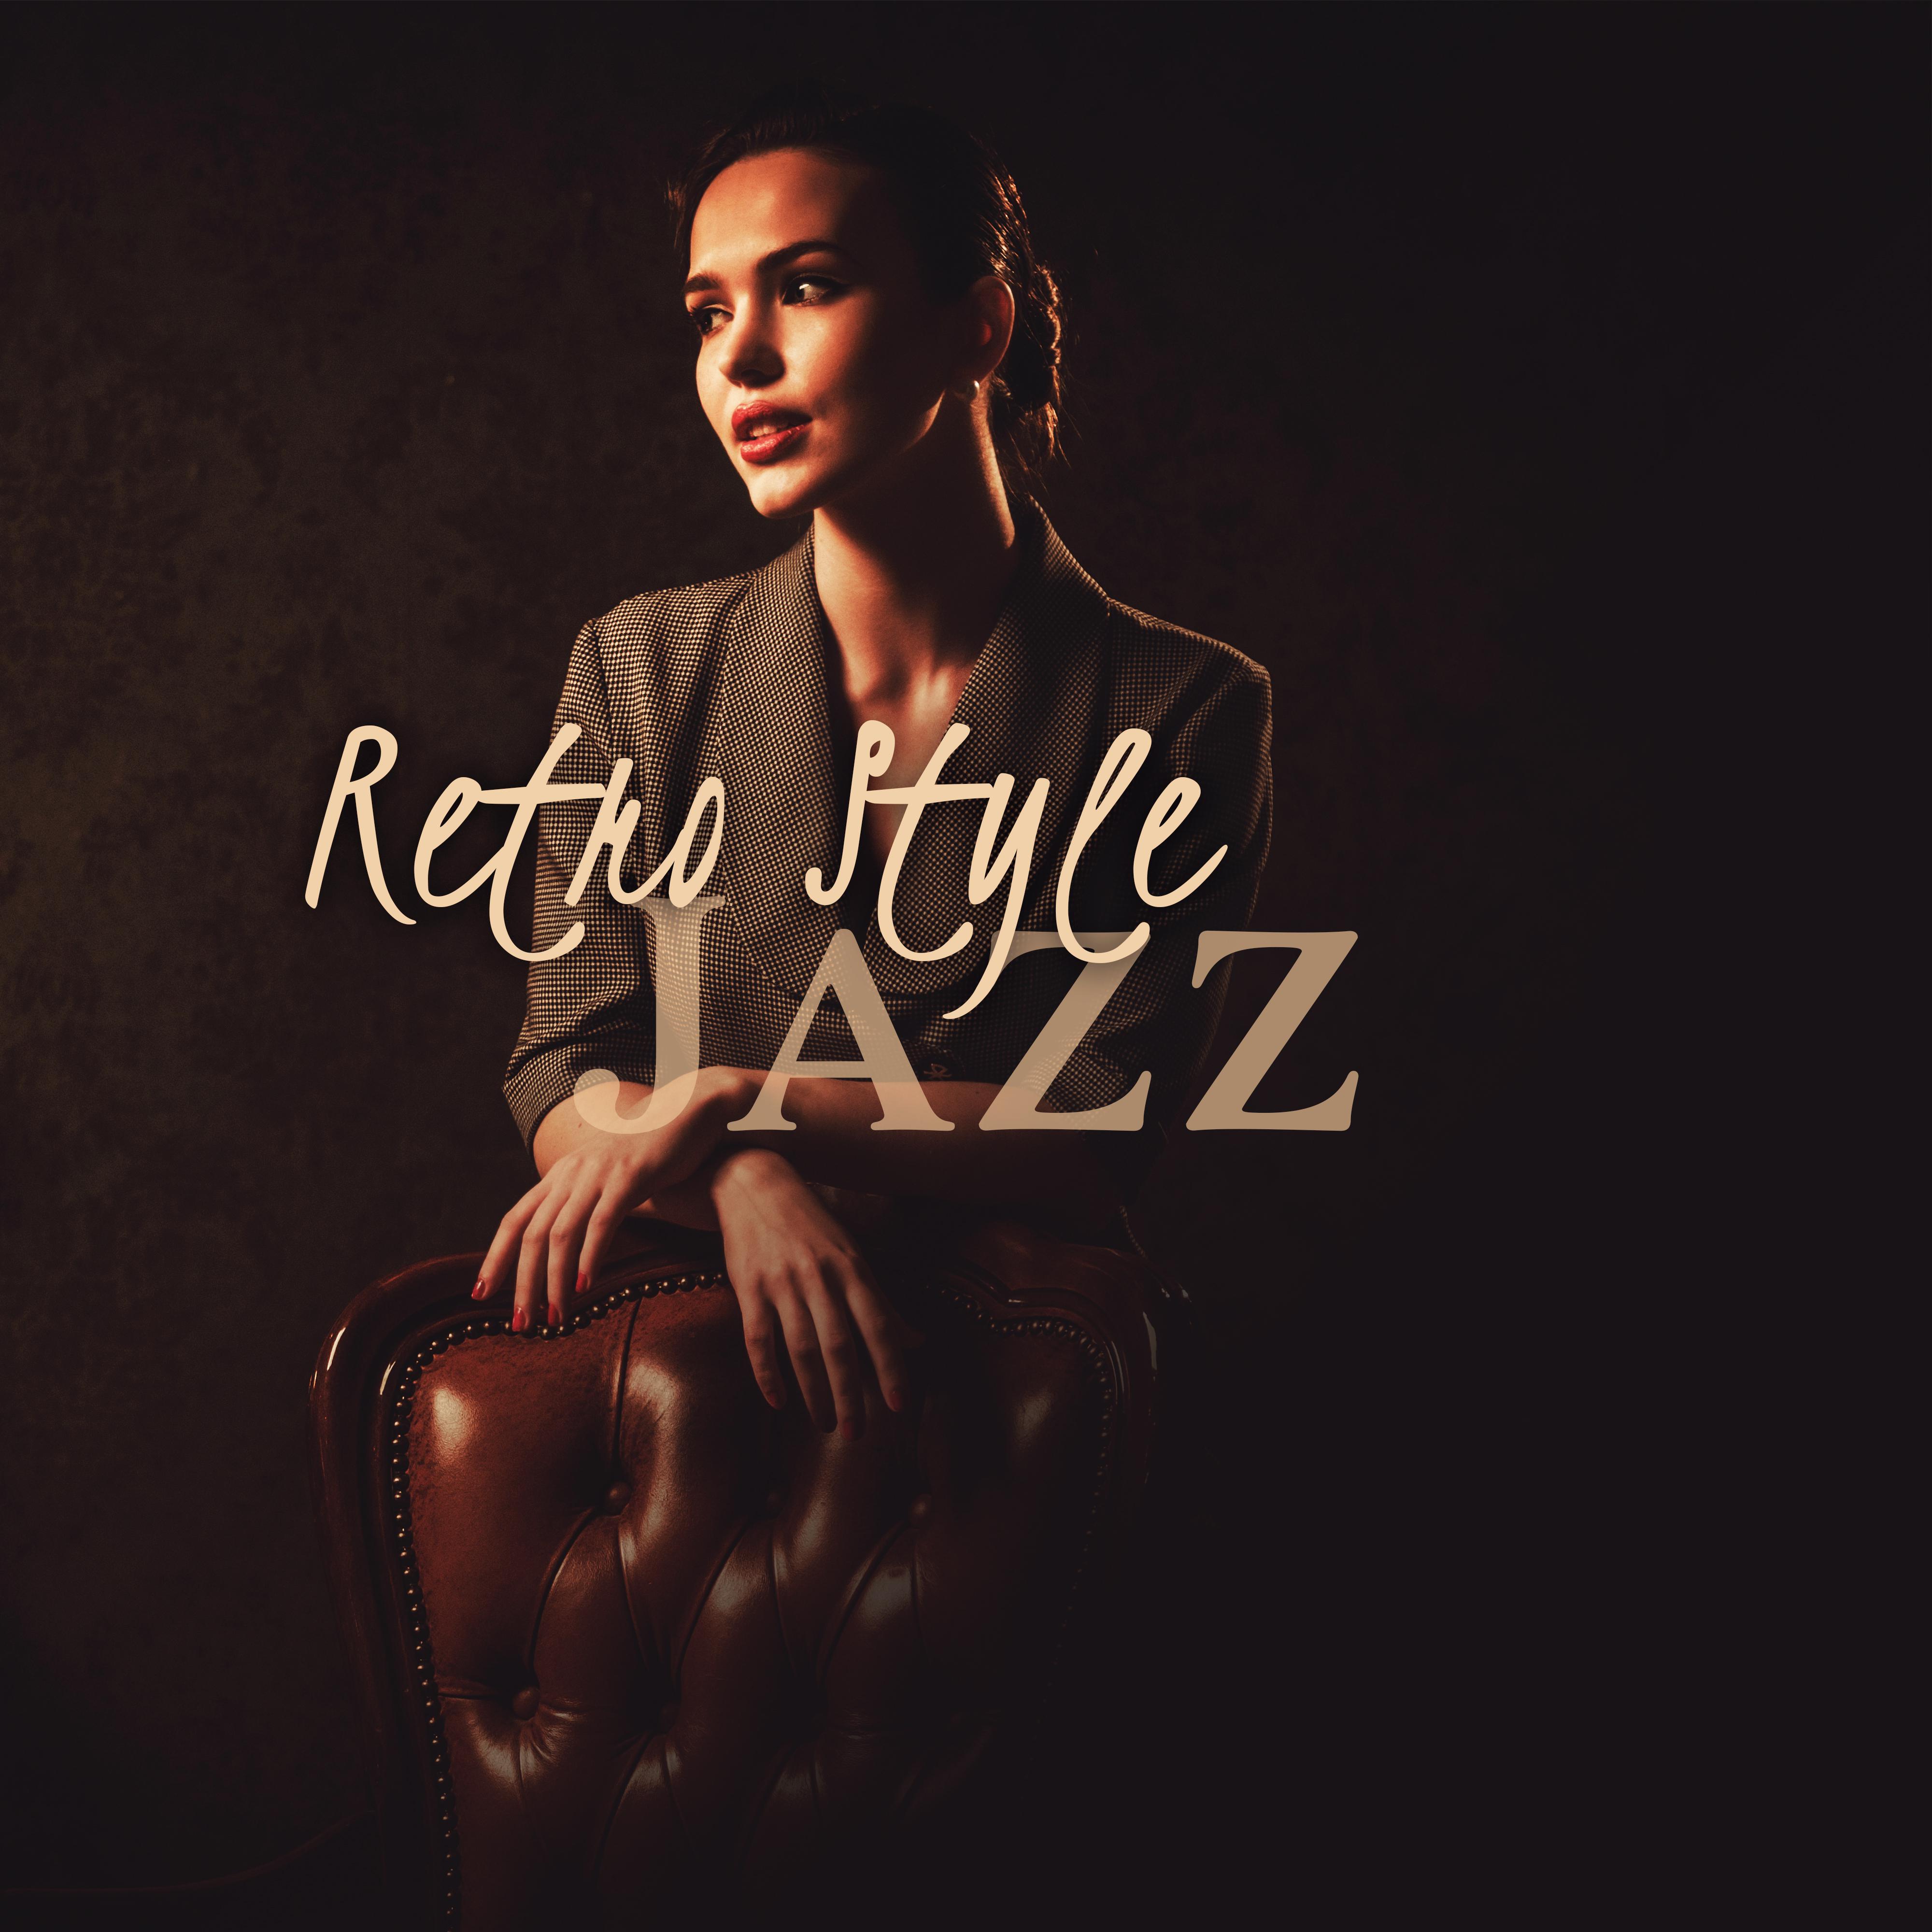 Retro Style Jazz: Music in Old Good Style